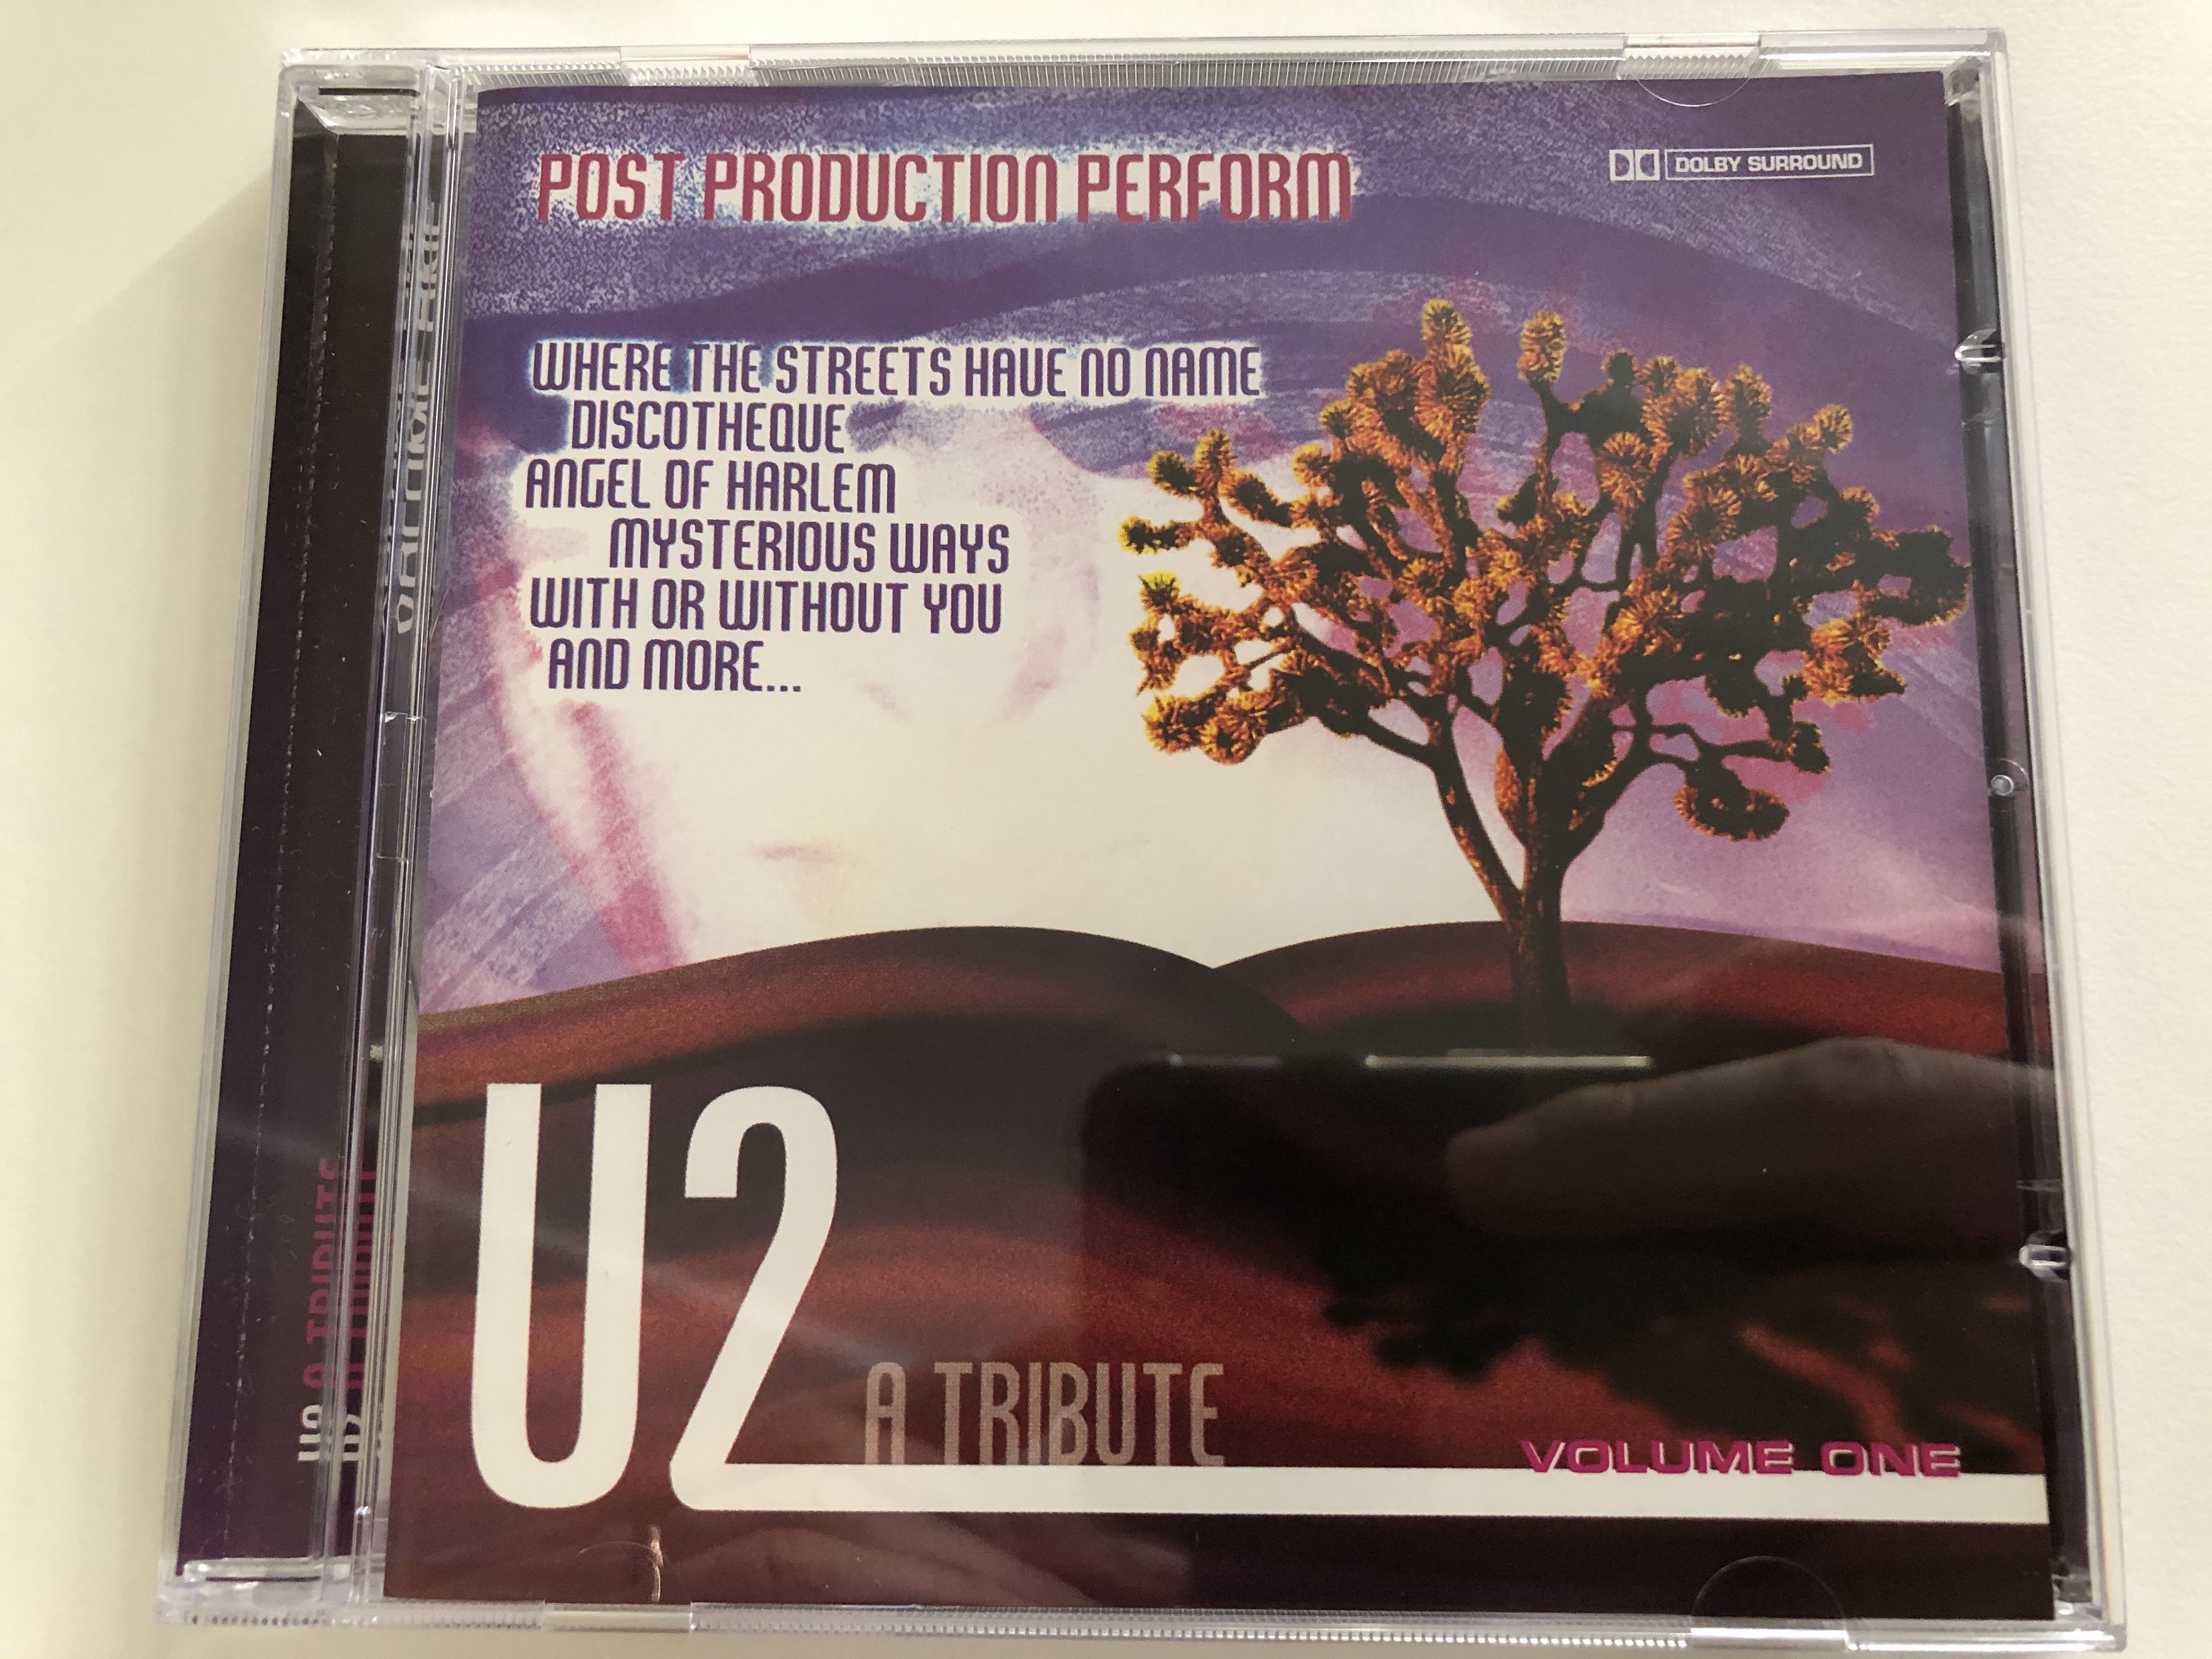 u2-a-tribute-volume-one-post-profuction-perform-where-the-streets-have-no-name-discotheque-angel-of-harlem-mysterious-ways-with-or-without-you-and-more...-maverick-music-audio-cd-1-.jpg